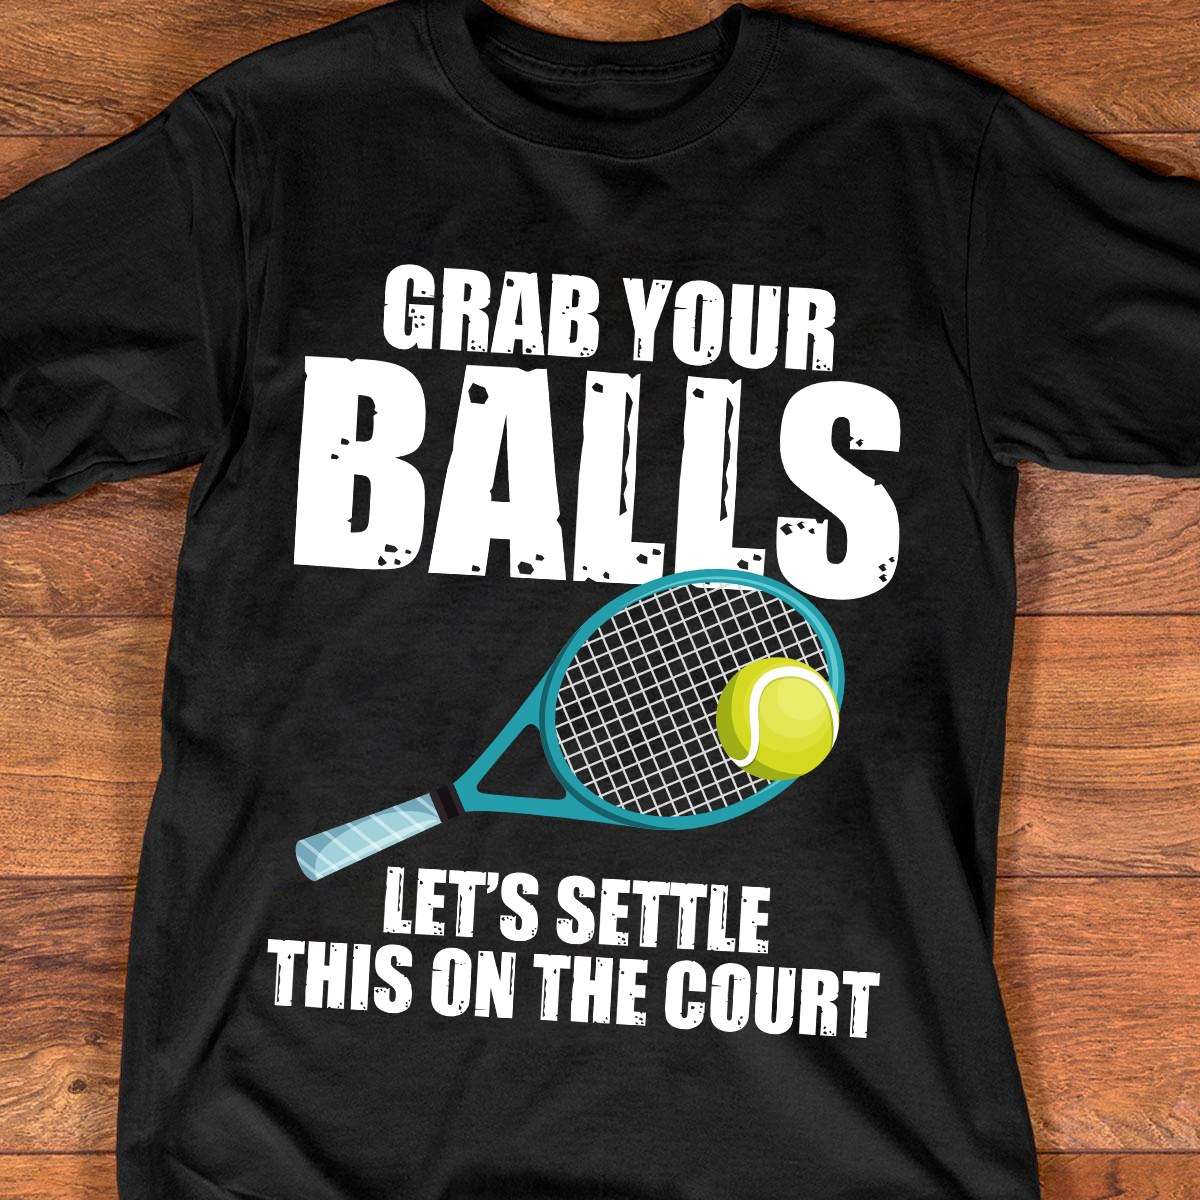 Grab your balls, let's settle this on the court - Tennis ball, tennis player gift